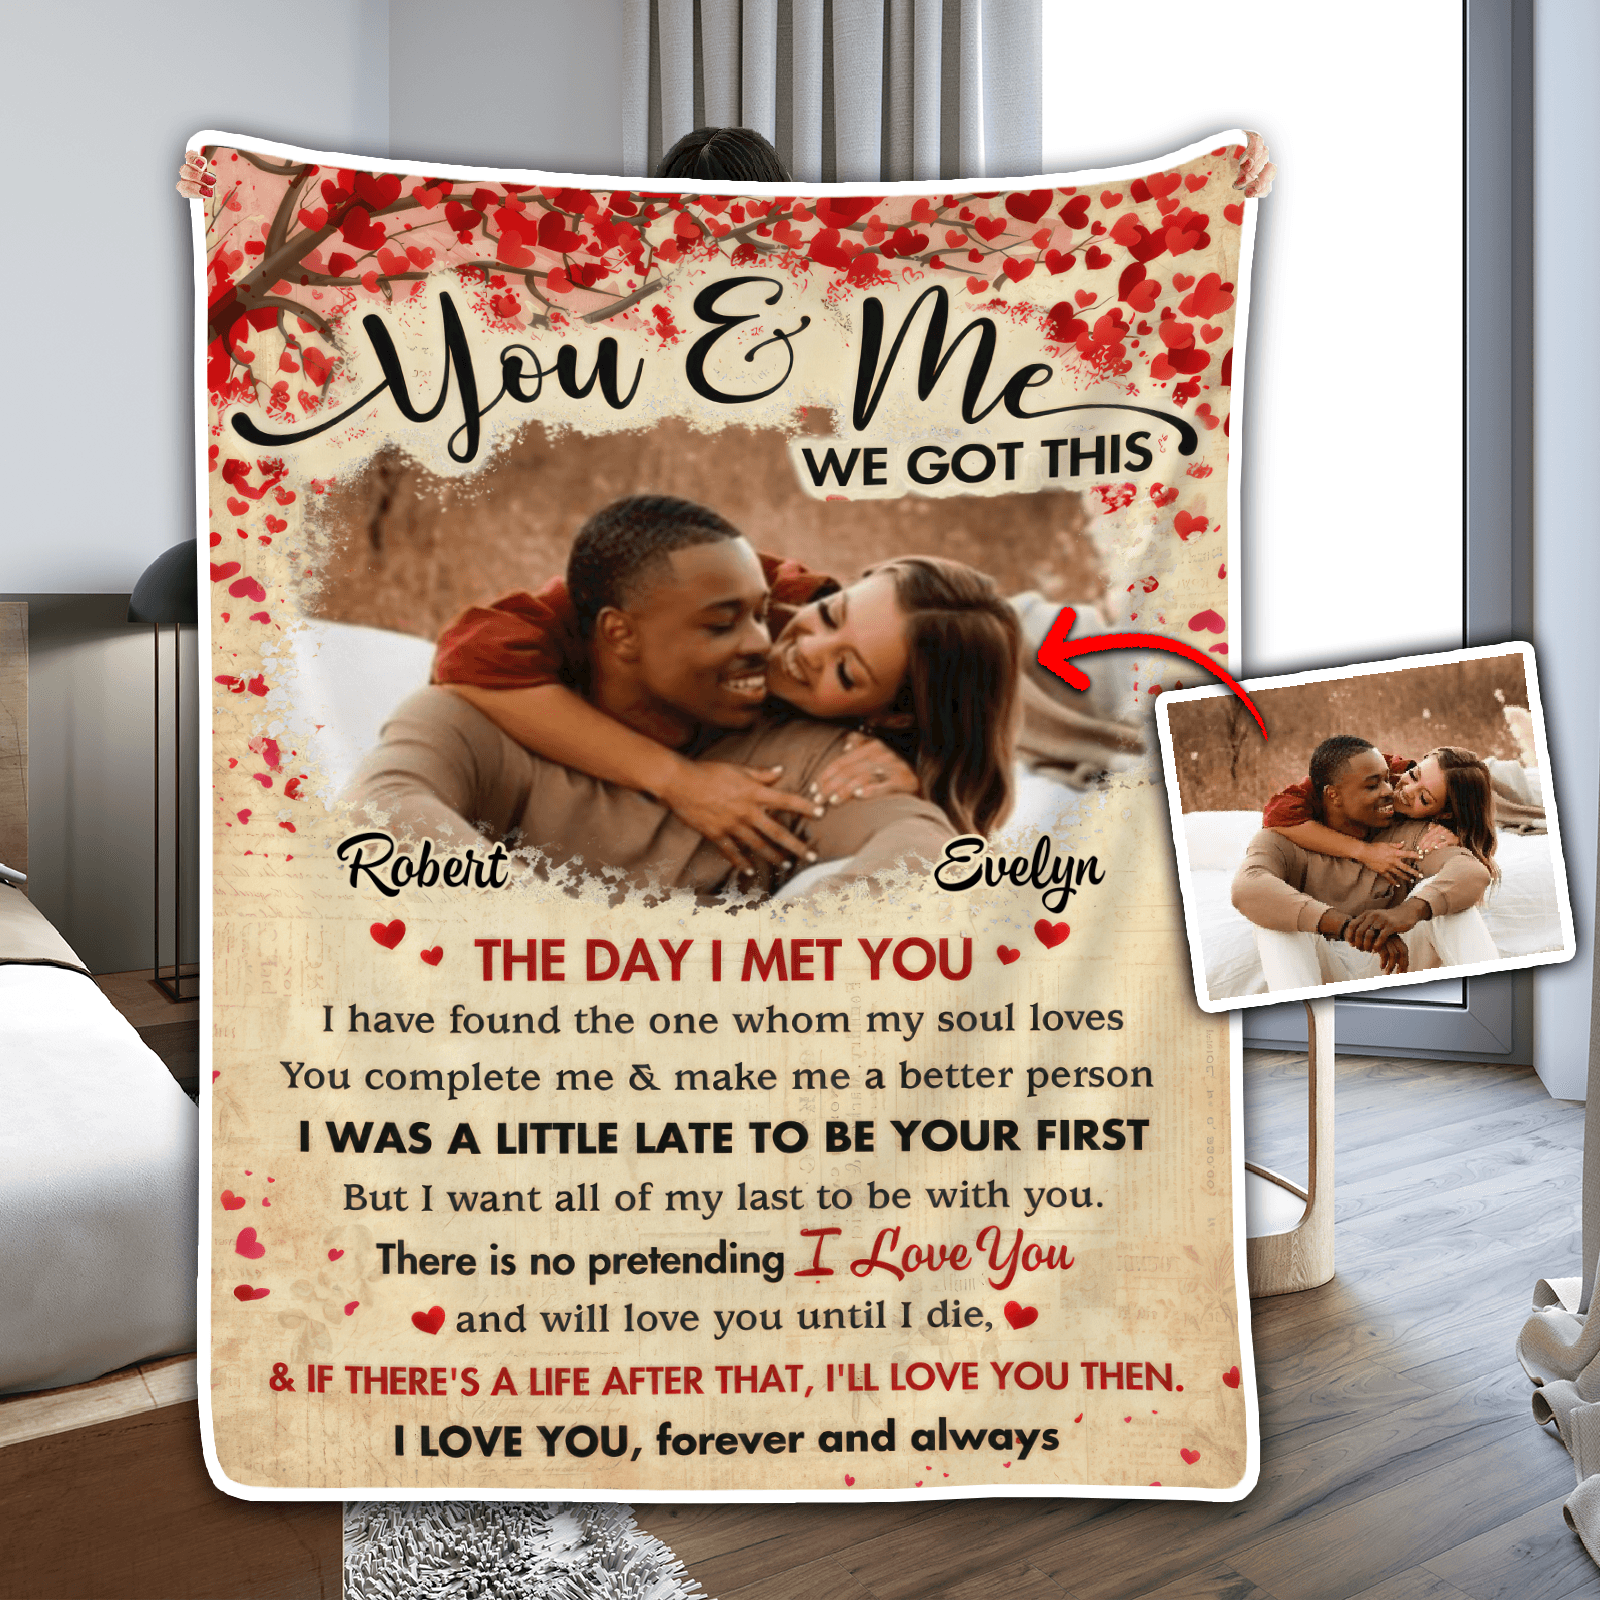 Custom Photo You & Me We Got This | Personalized Gift For Couples, Valentine, Anniversary, Husband Wife, Girlfriend, Boyfriend, Her/Him | Blanket